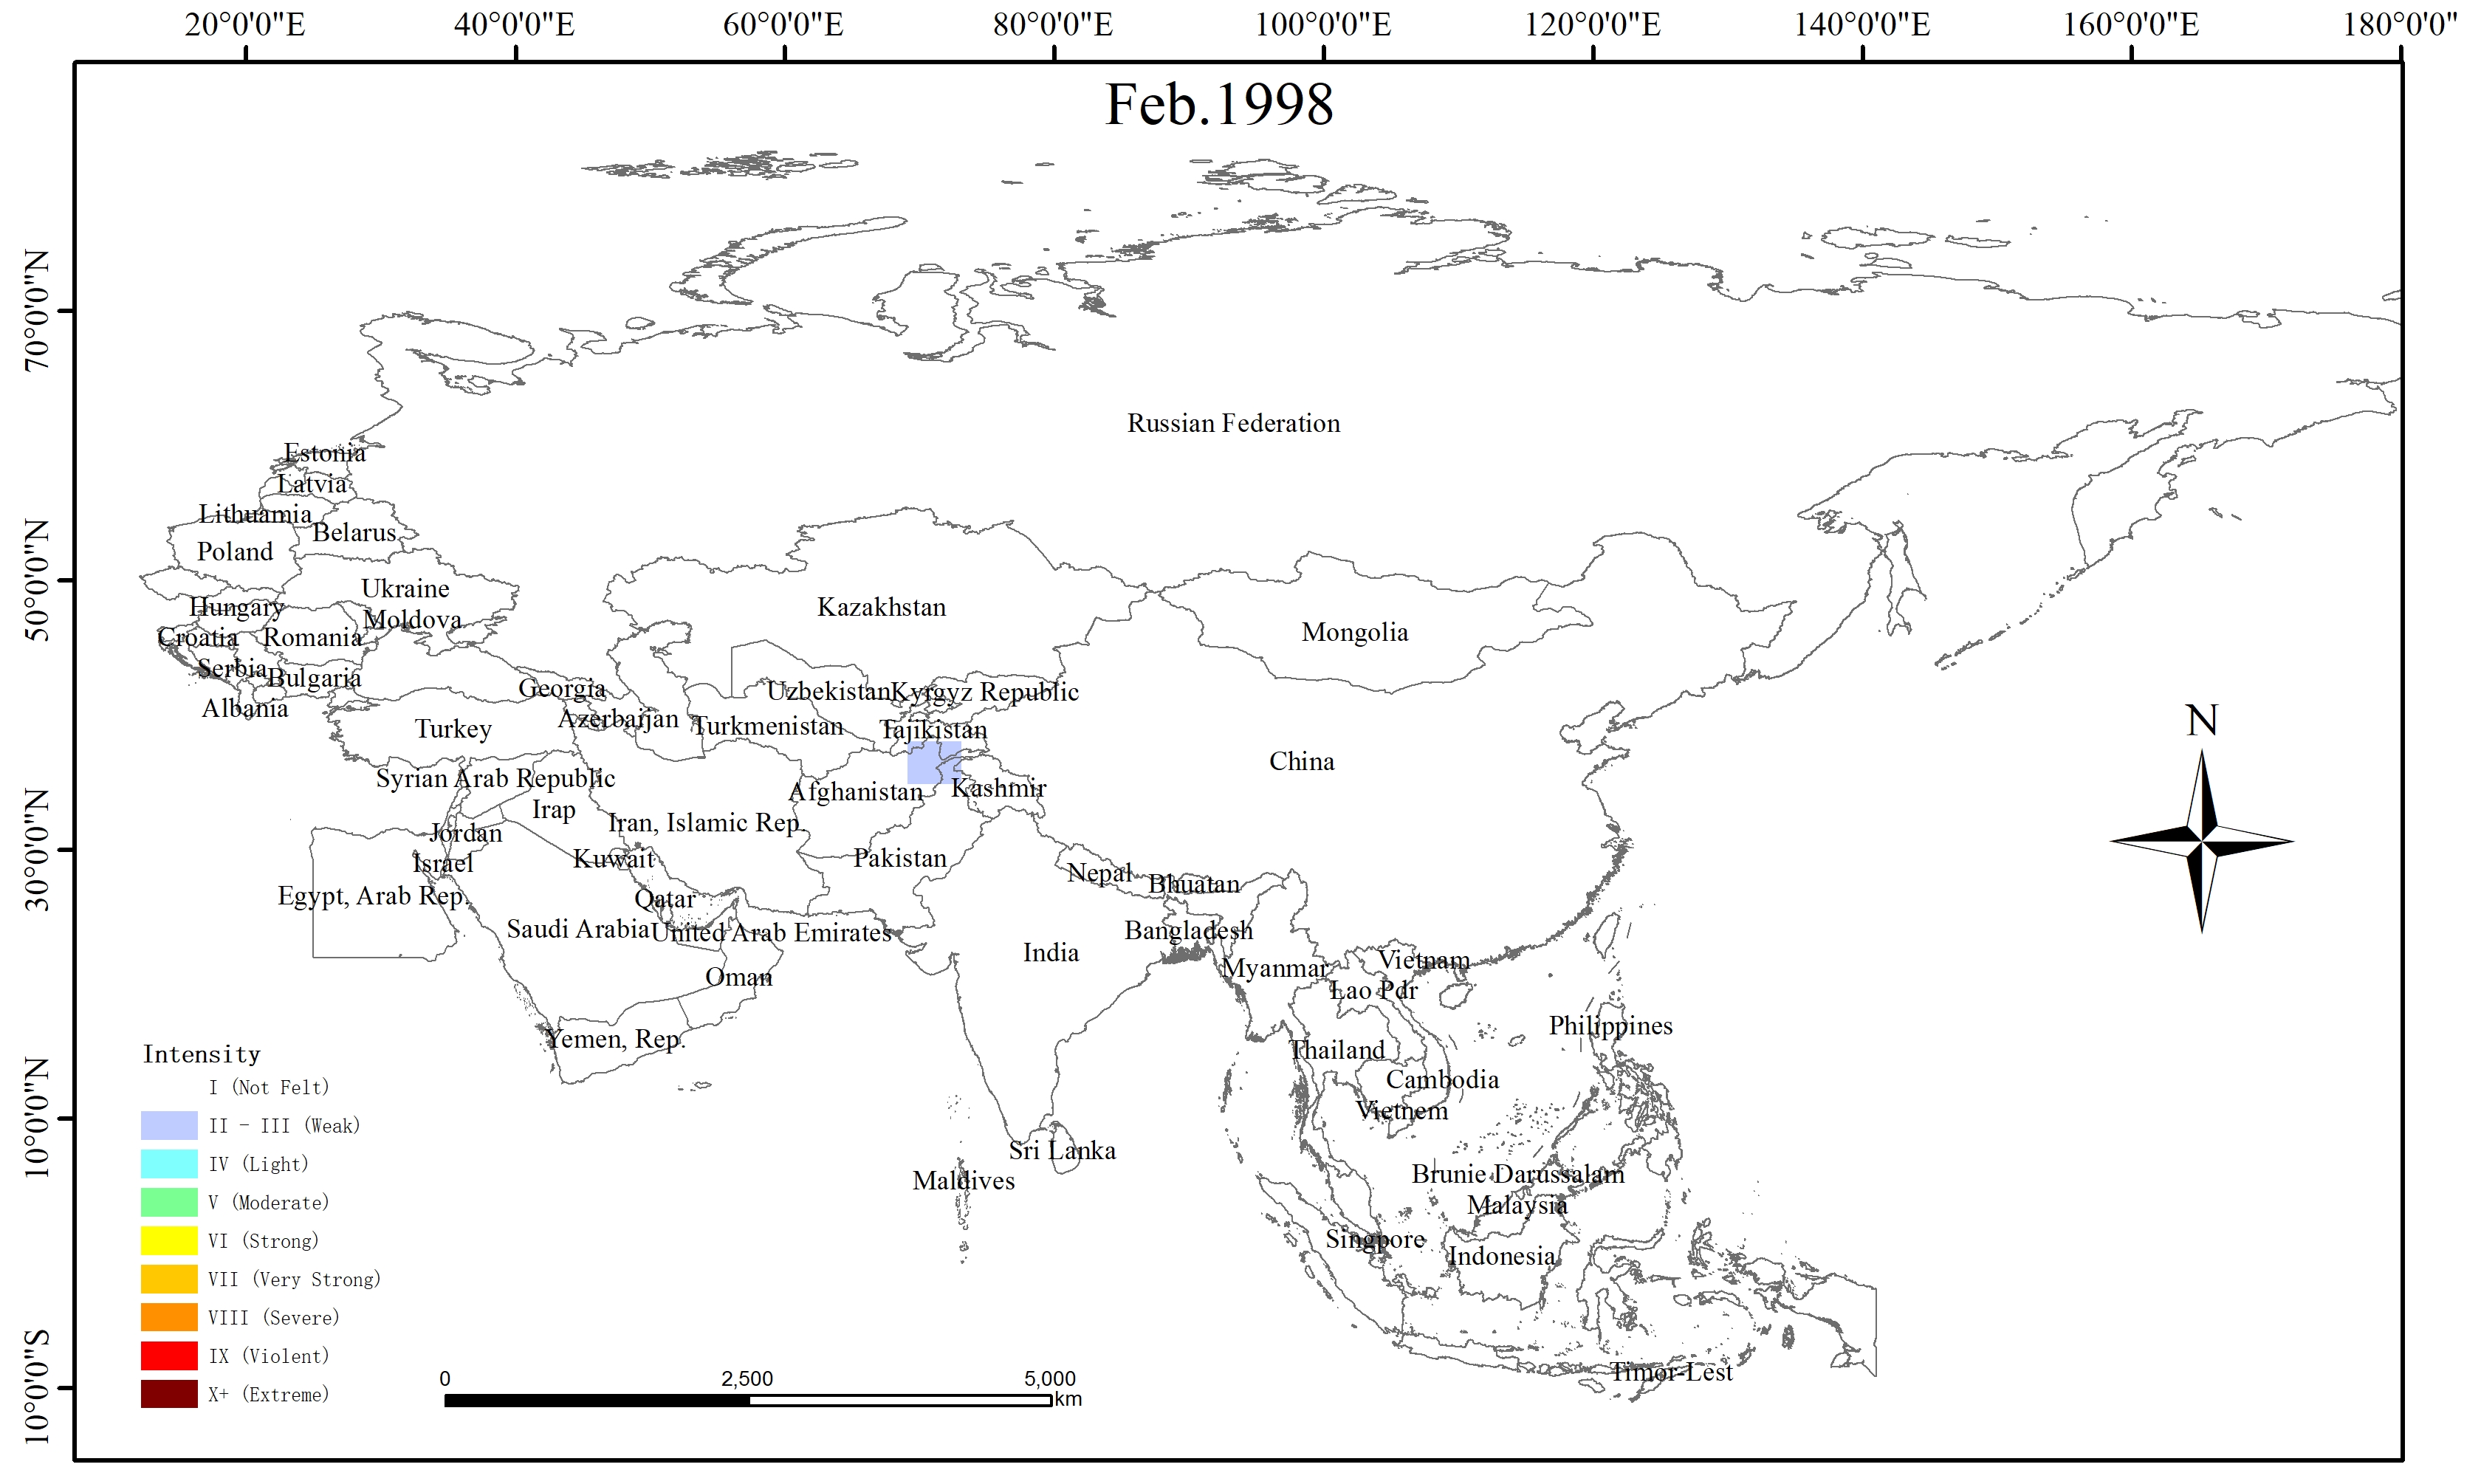 Spatio-temporal Distribution of Earthquake Disaster in the Belt and Road Area in 1998